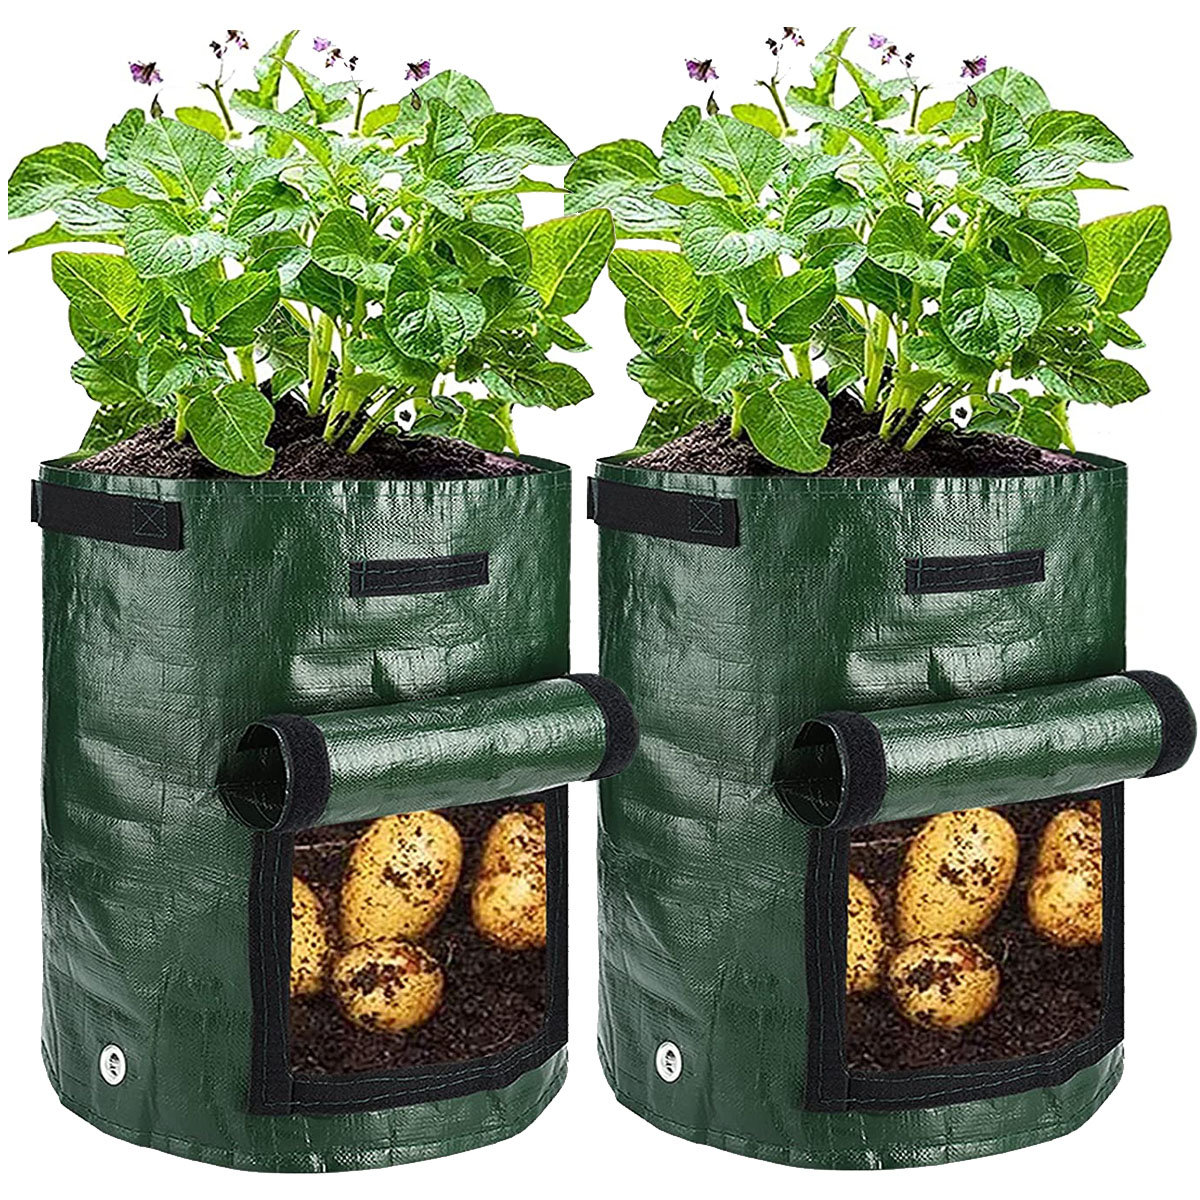 Gwenette 3 Growing Bags with Transparent Window Arlmont & Co. Size: 13.8 H x 11.8 W x 11.8 D